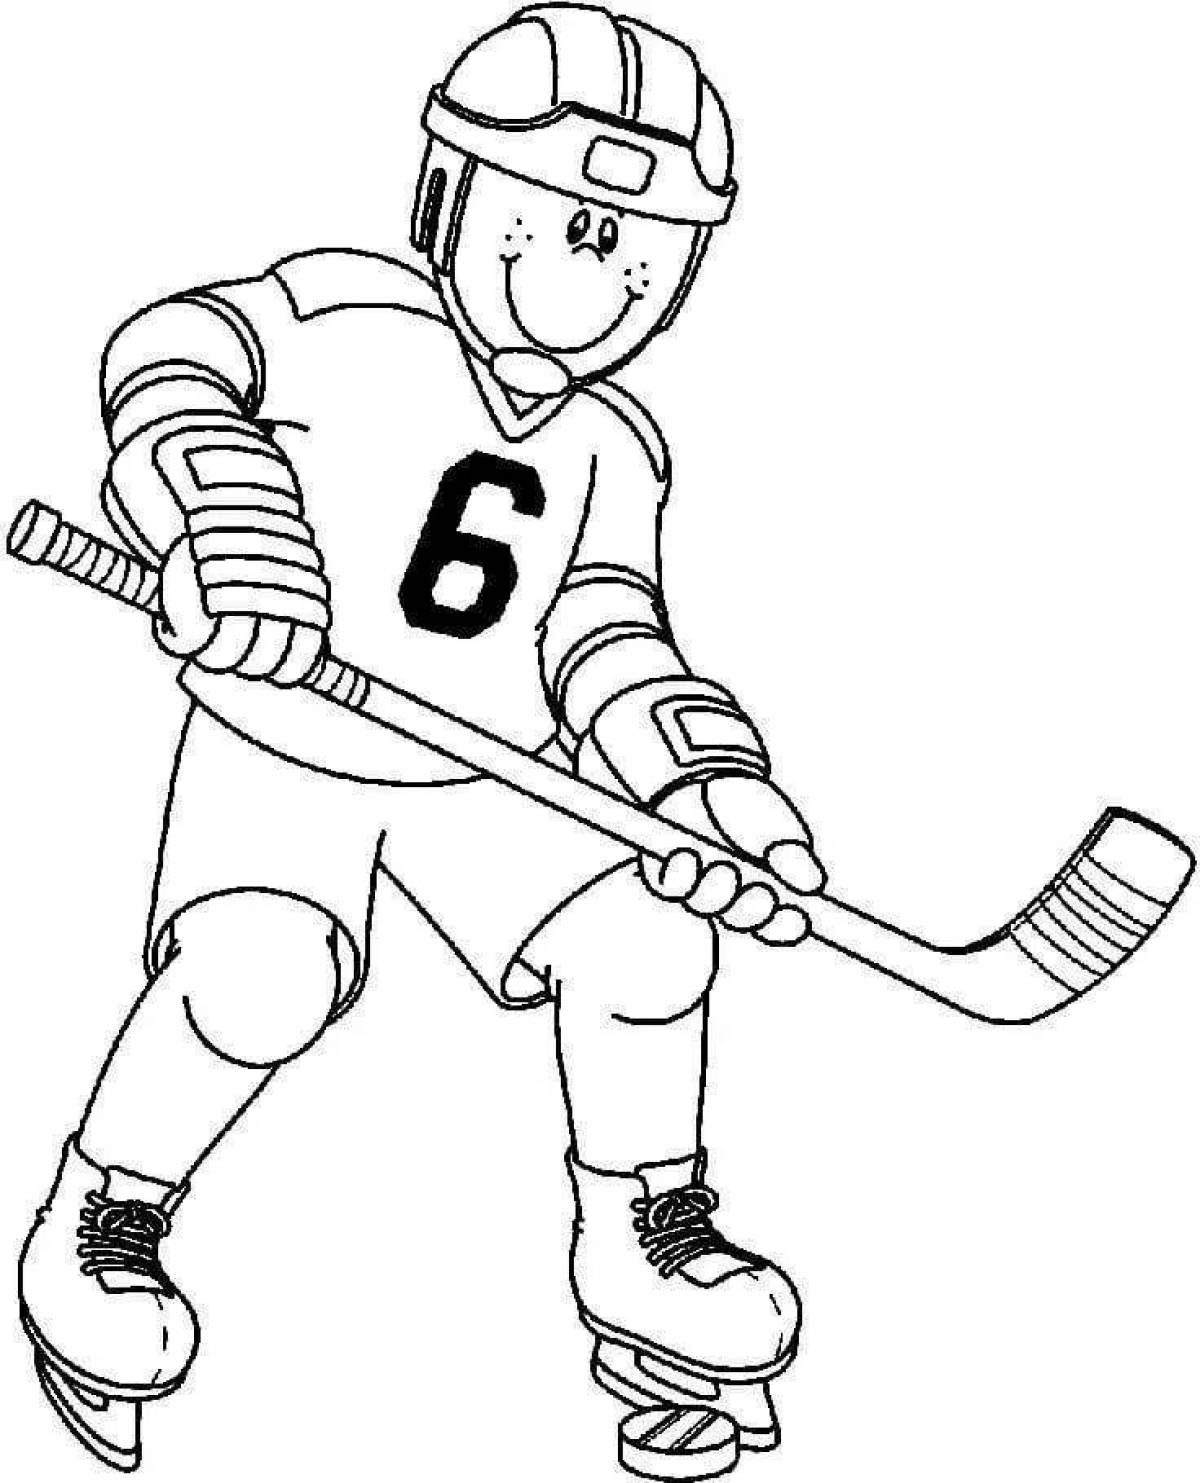 Intriguing hockey coloring book